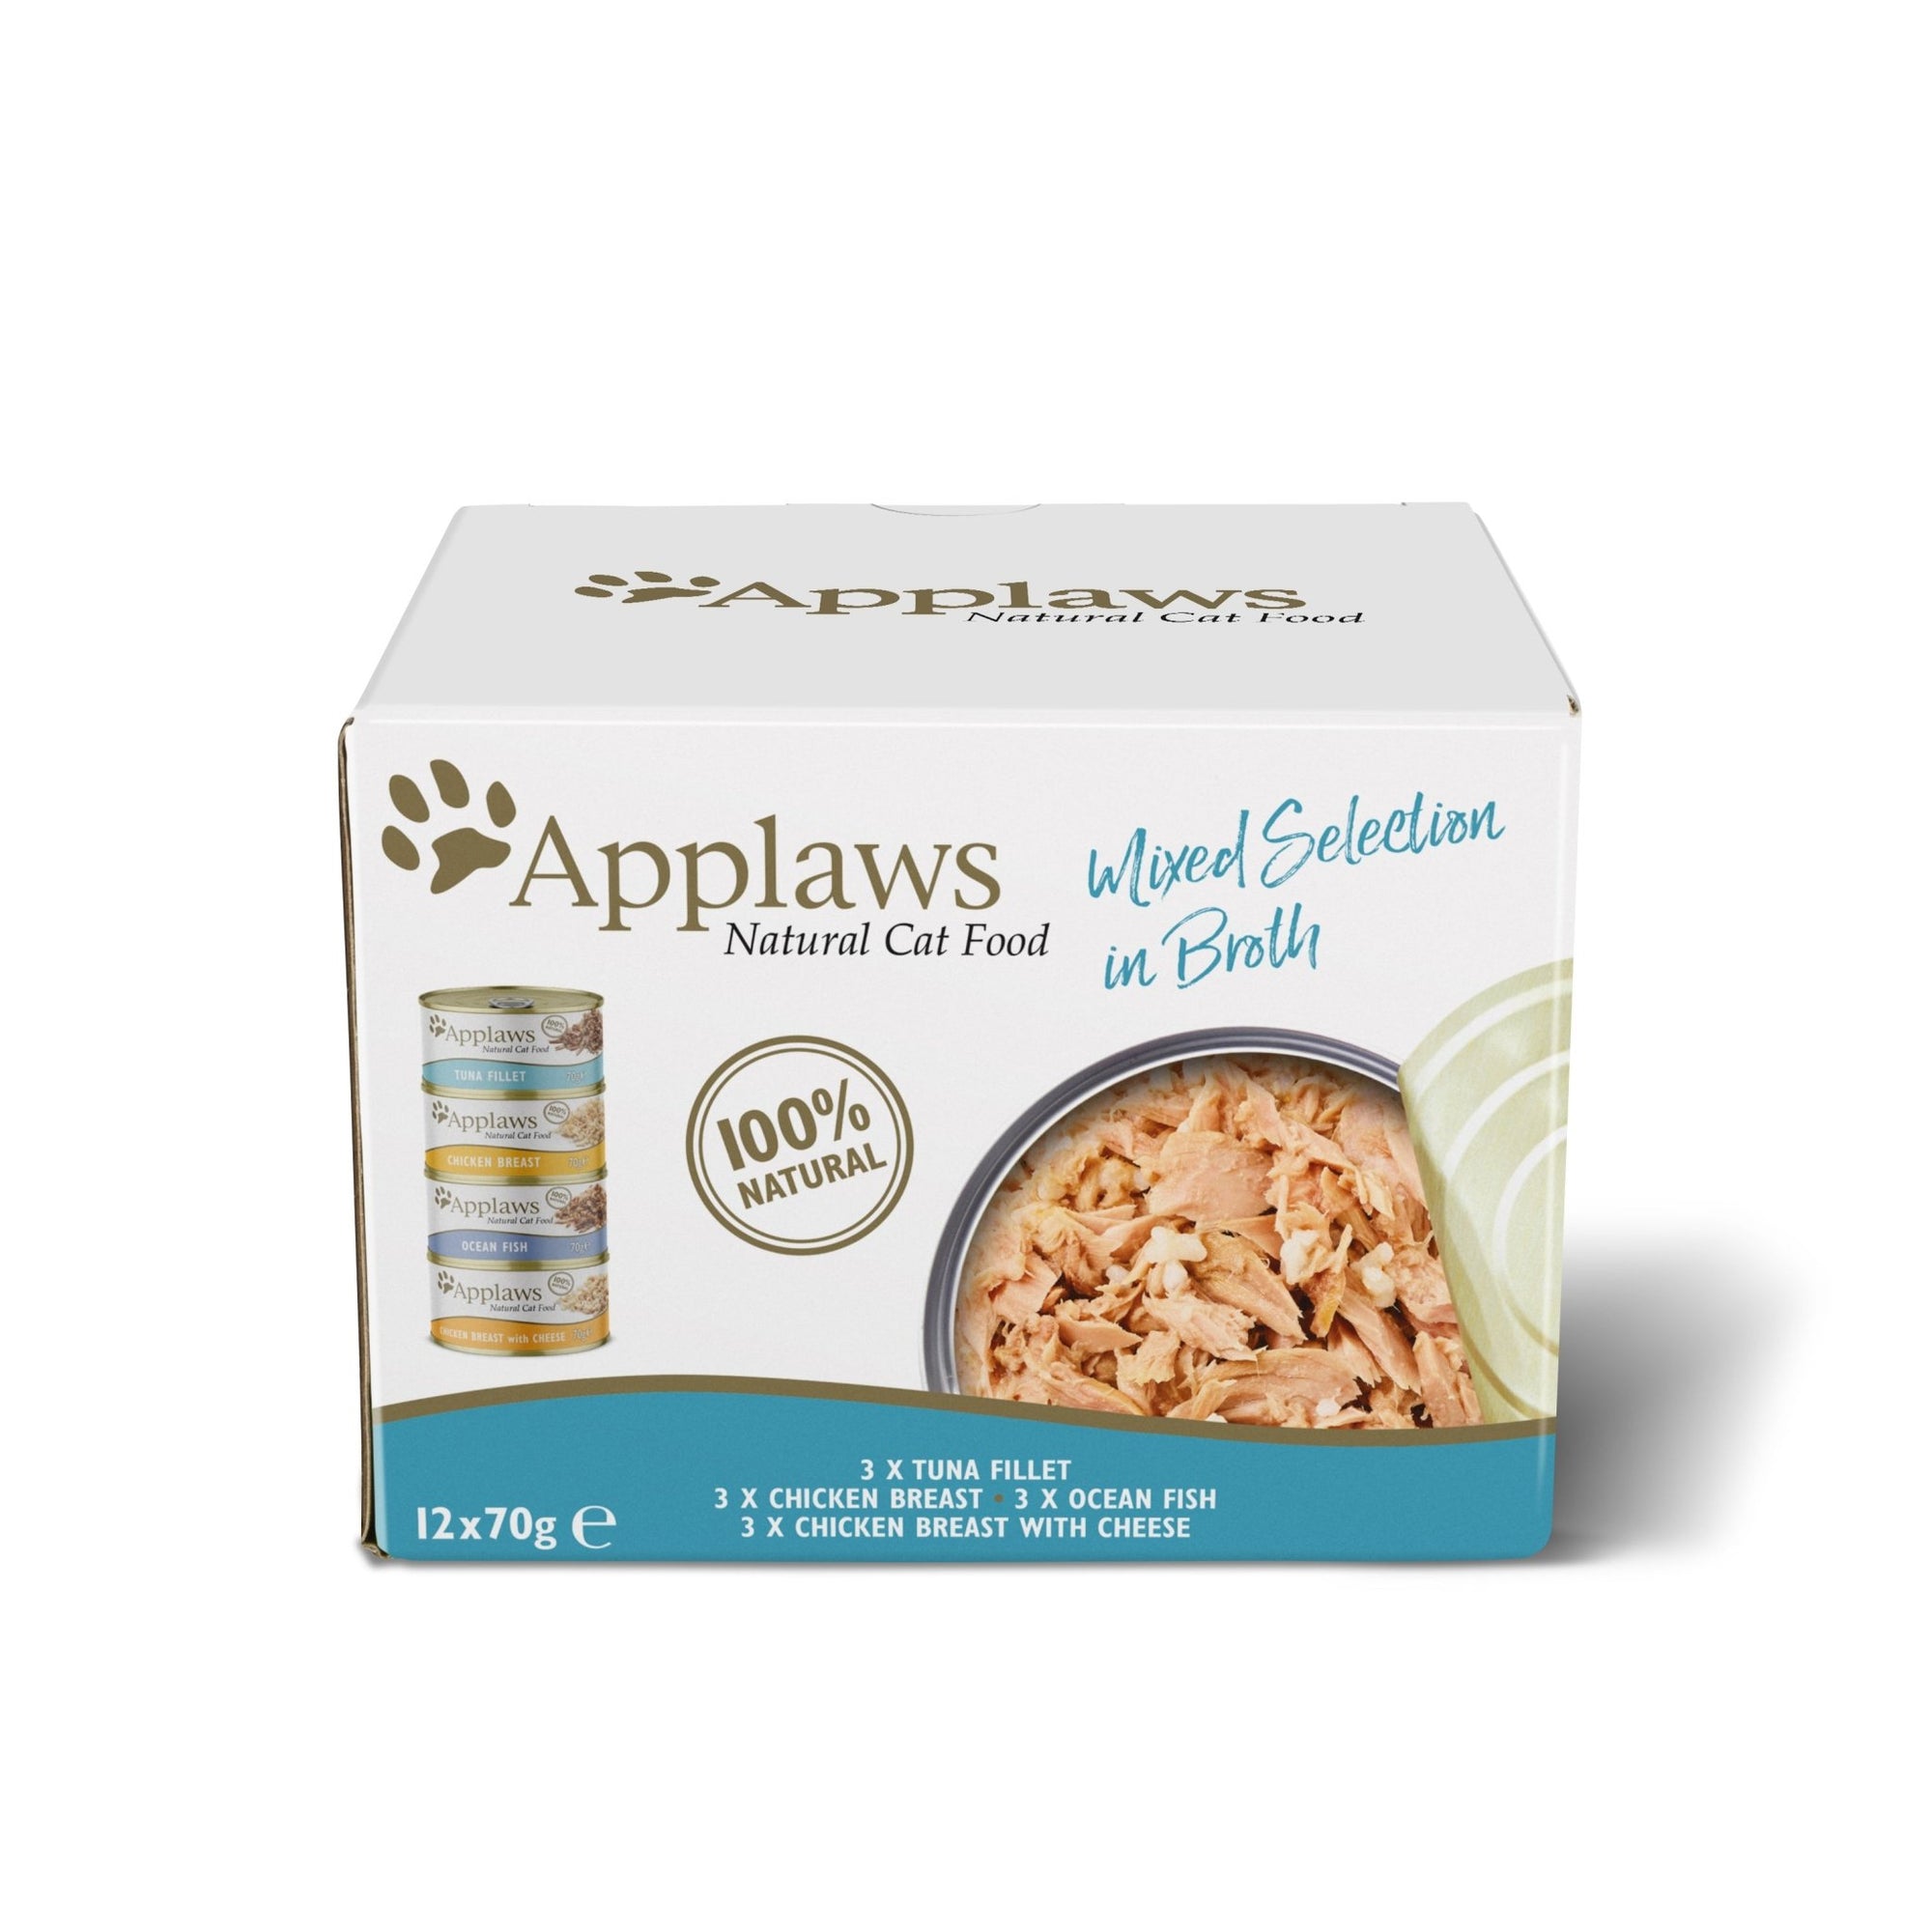 Applaws Cat Mixed Selection in Broth Tins 4 x 12 x 70g, Applaws,